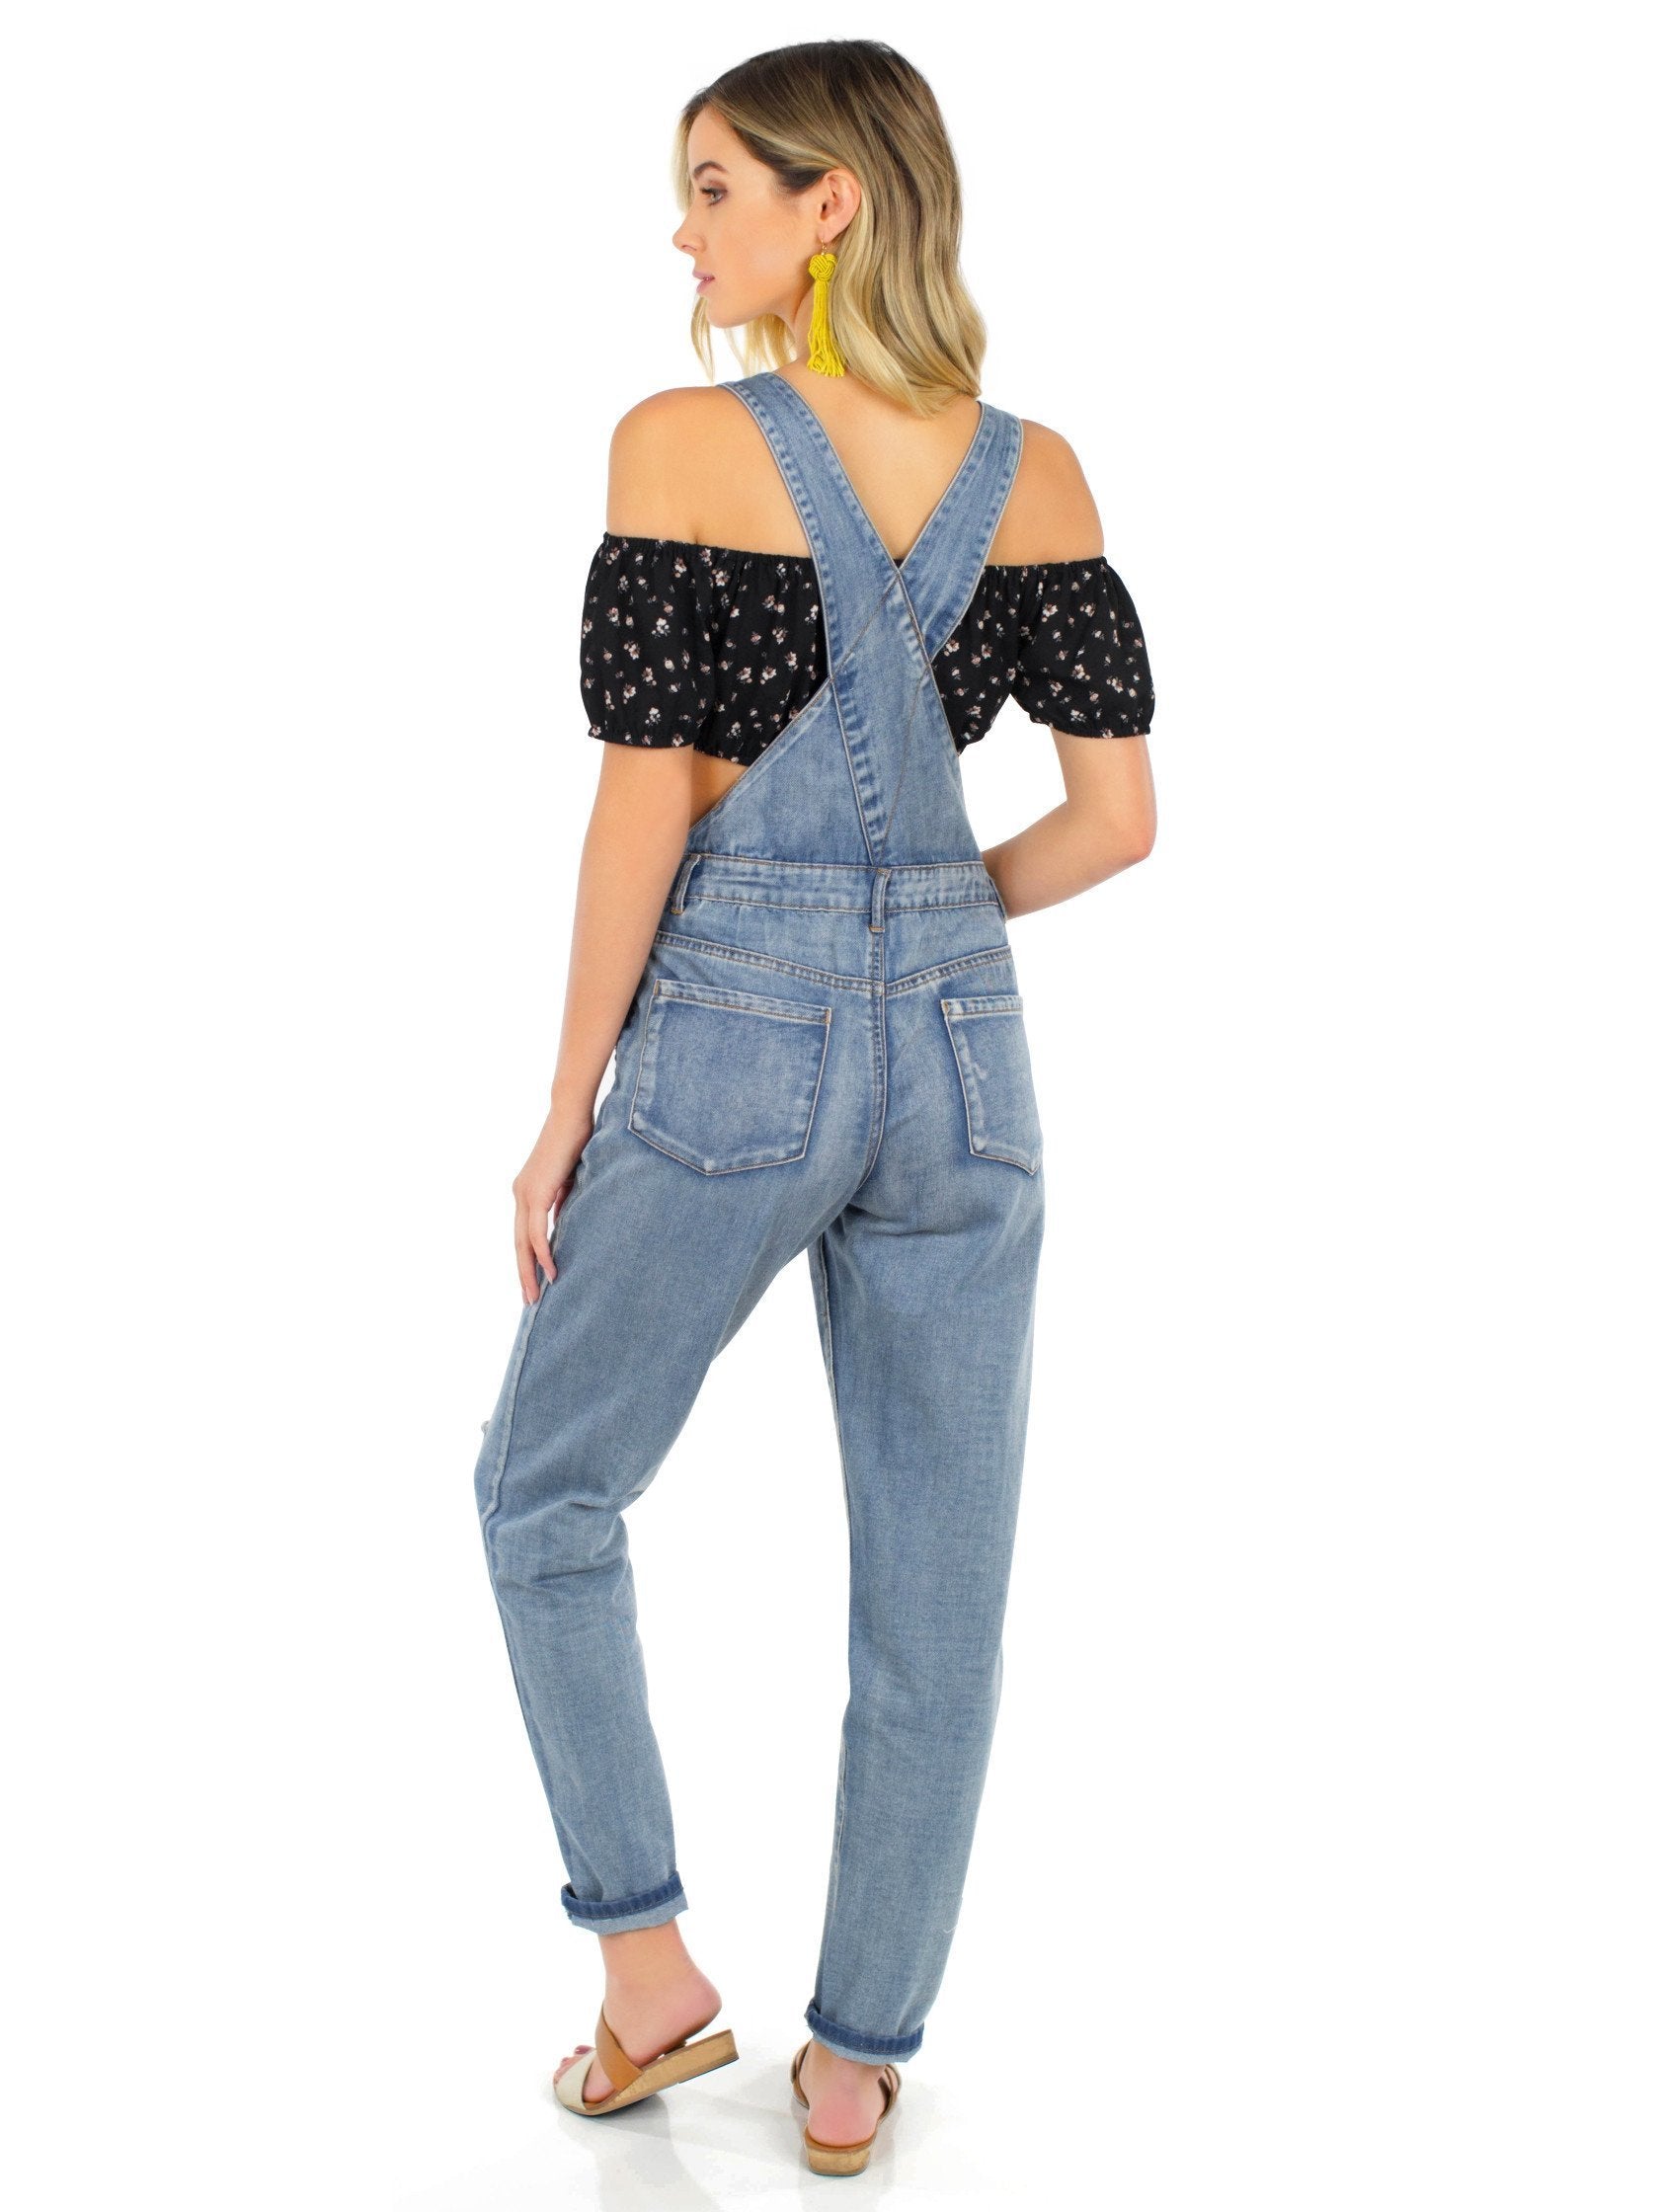 Women wearing a jumpsuit rental from FashionPass called Here For A Good Time Overalls